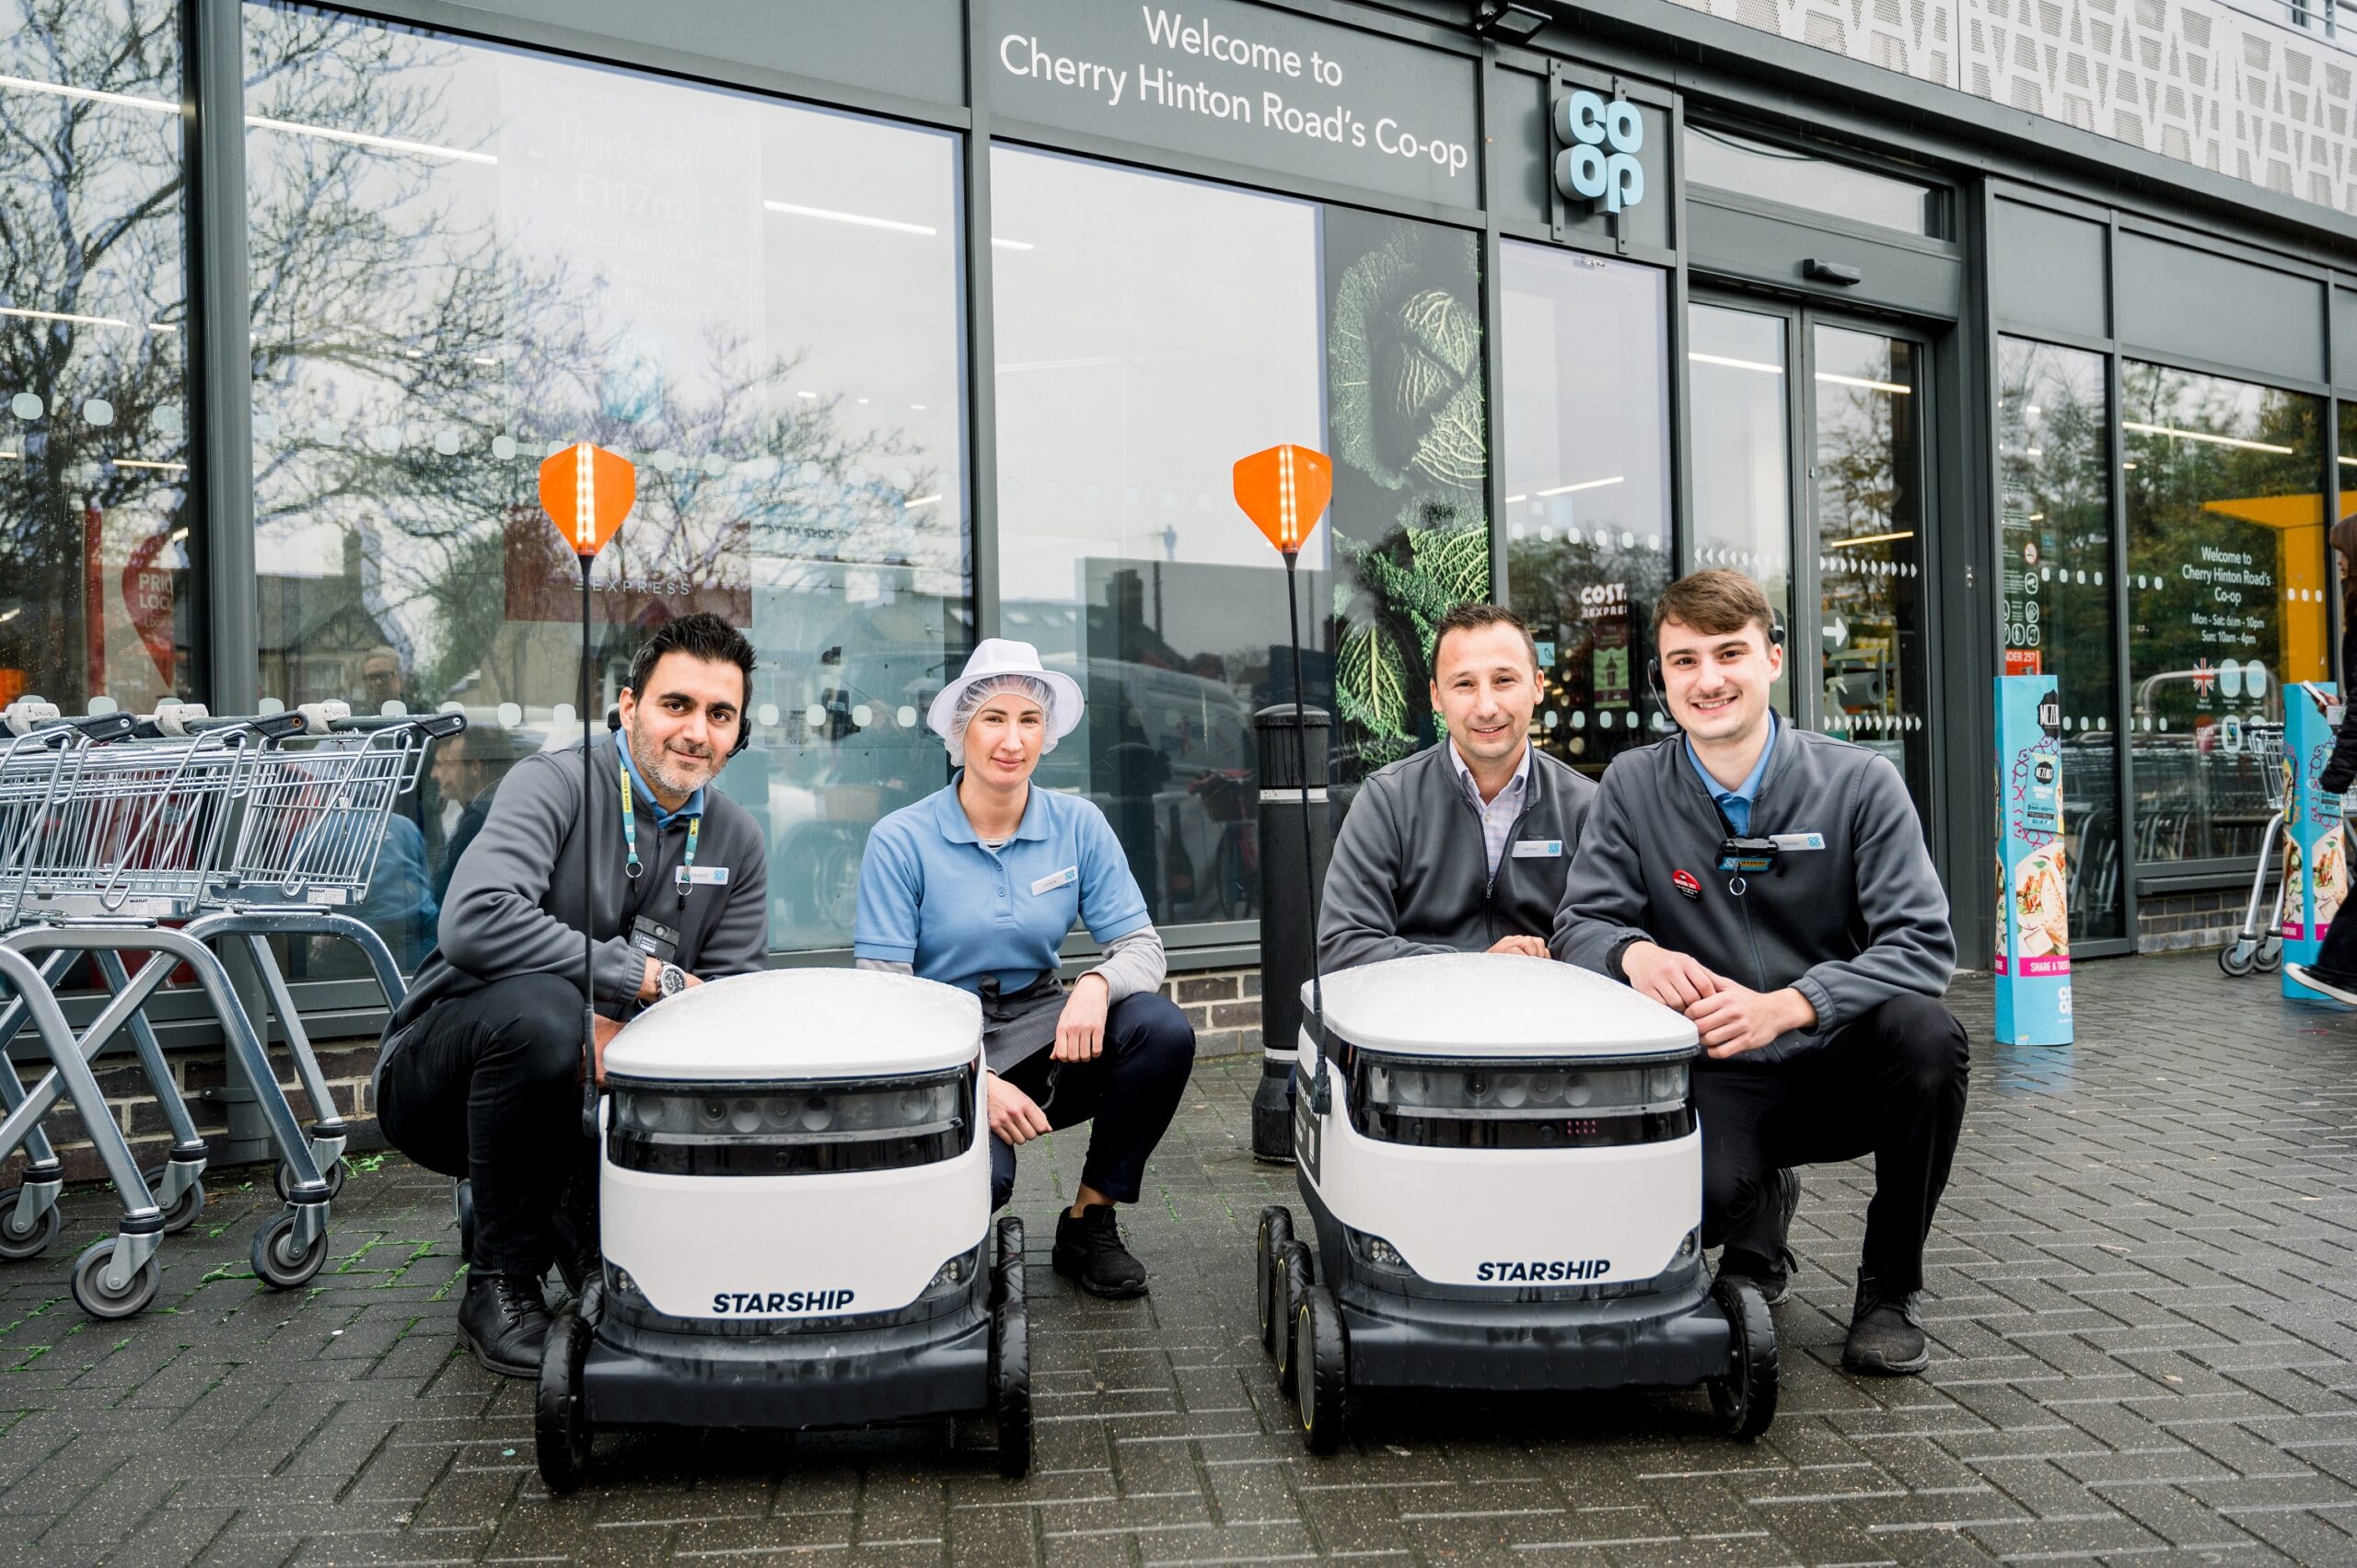 Cambridge Co-op rolls out delivery robots